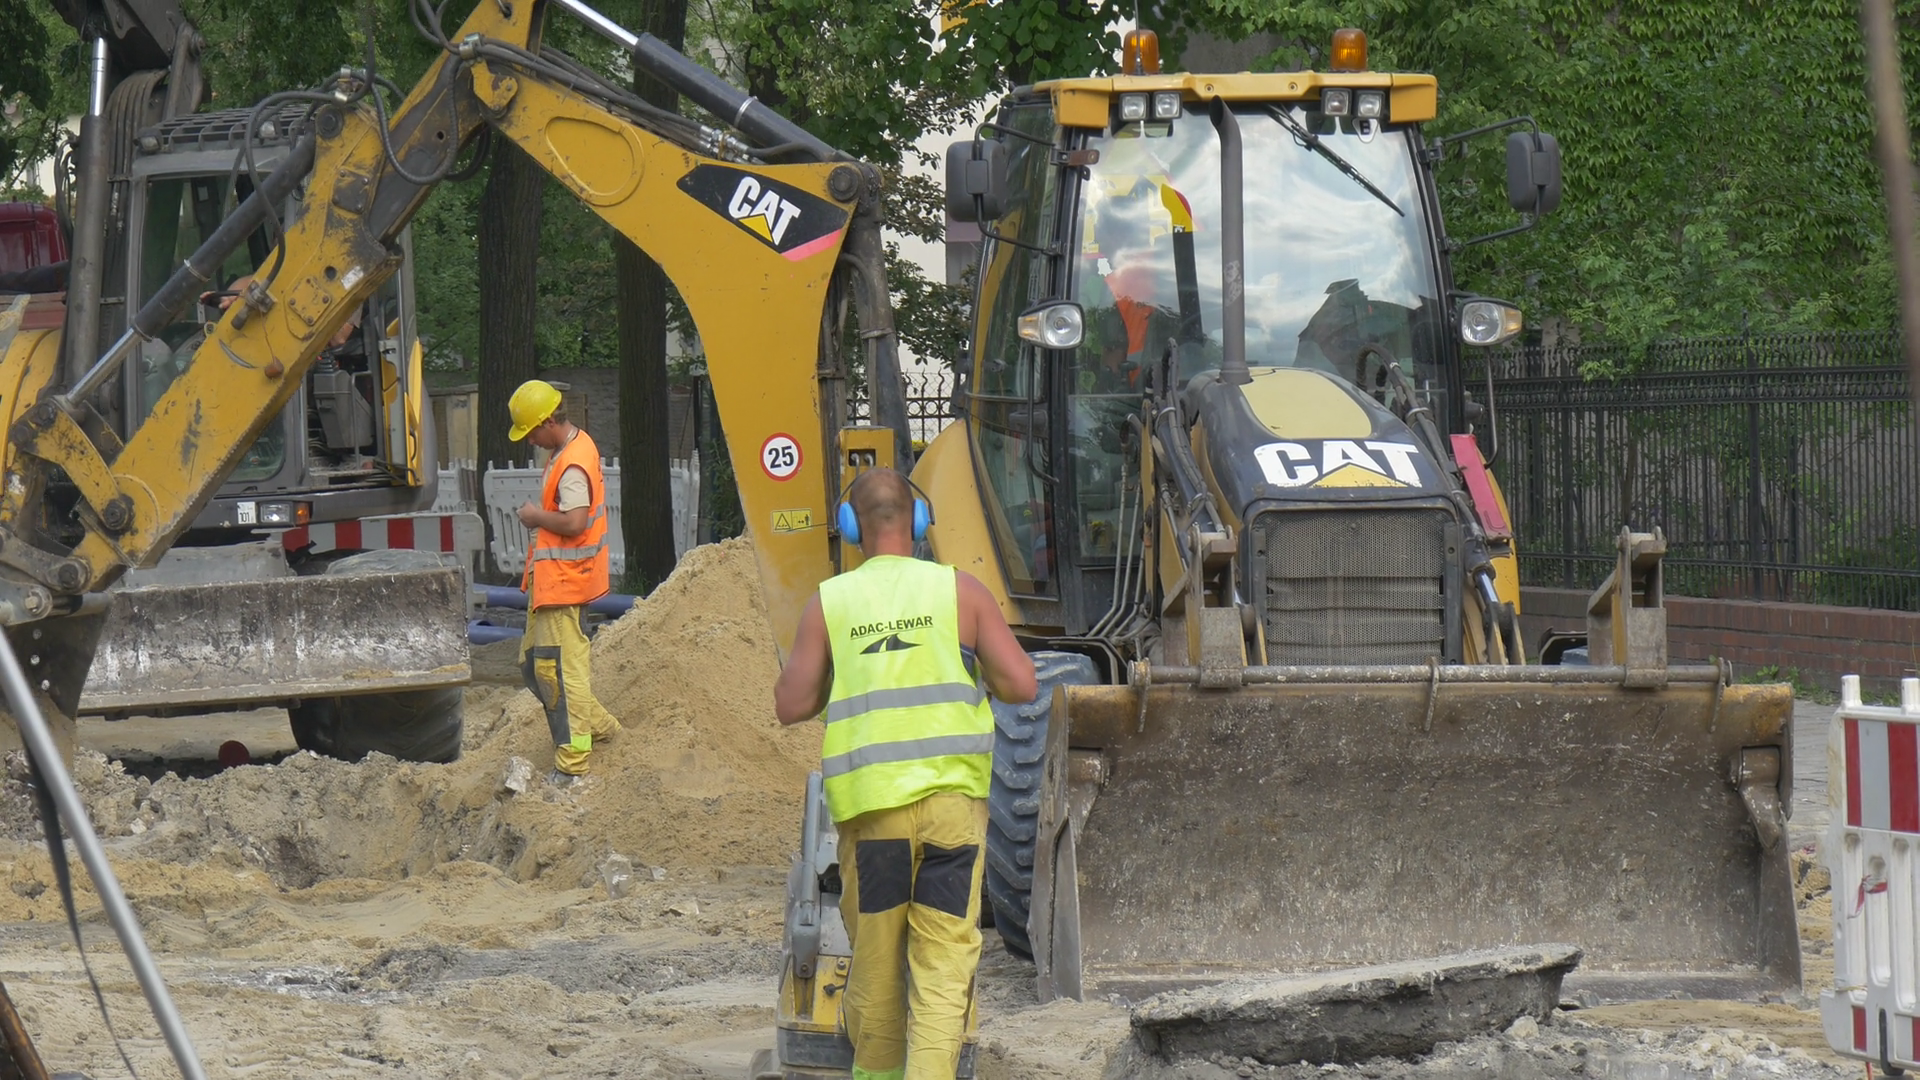 City Day in Opole Excavator Digs a Trench Workers Repair the Road ...